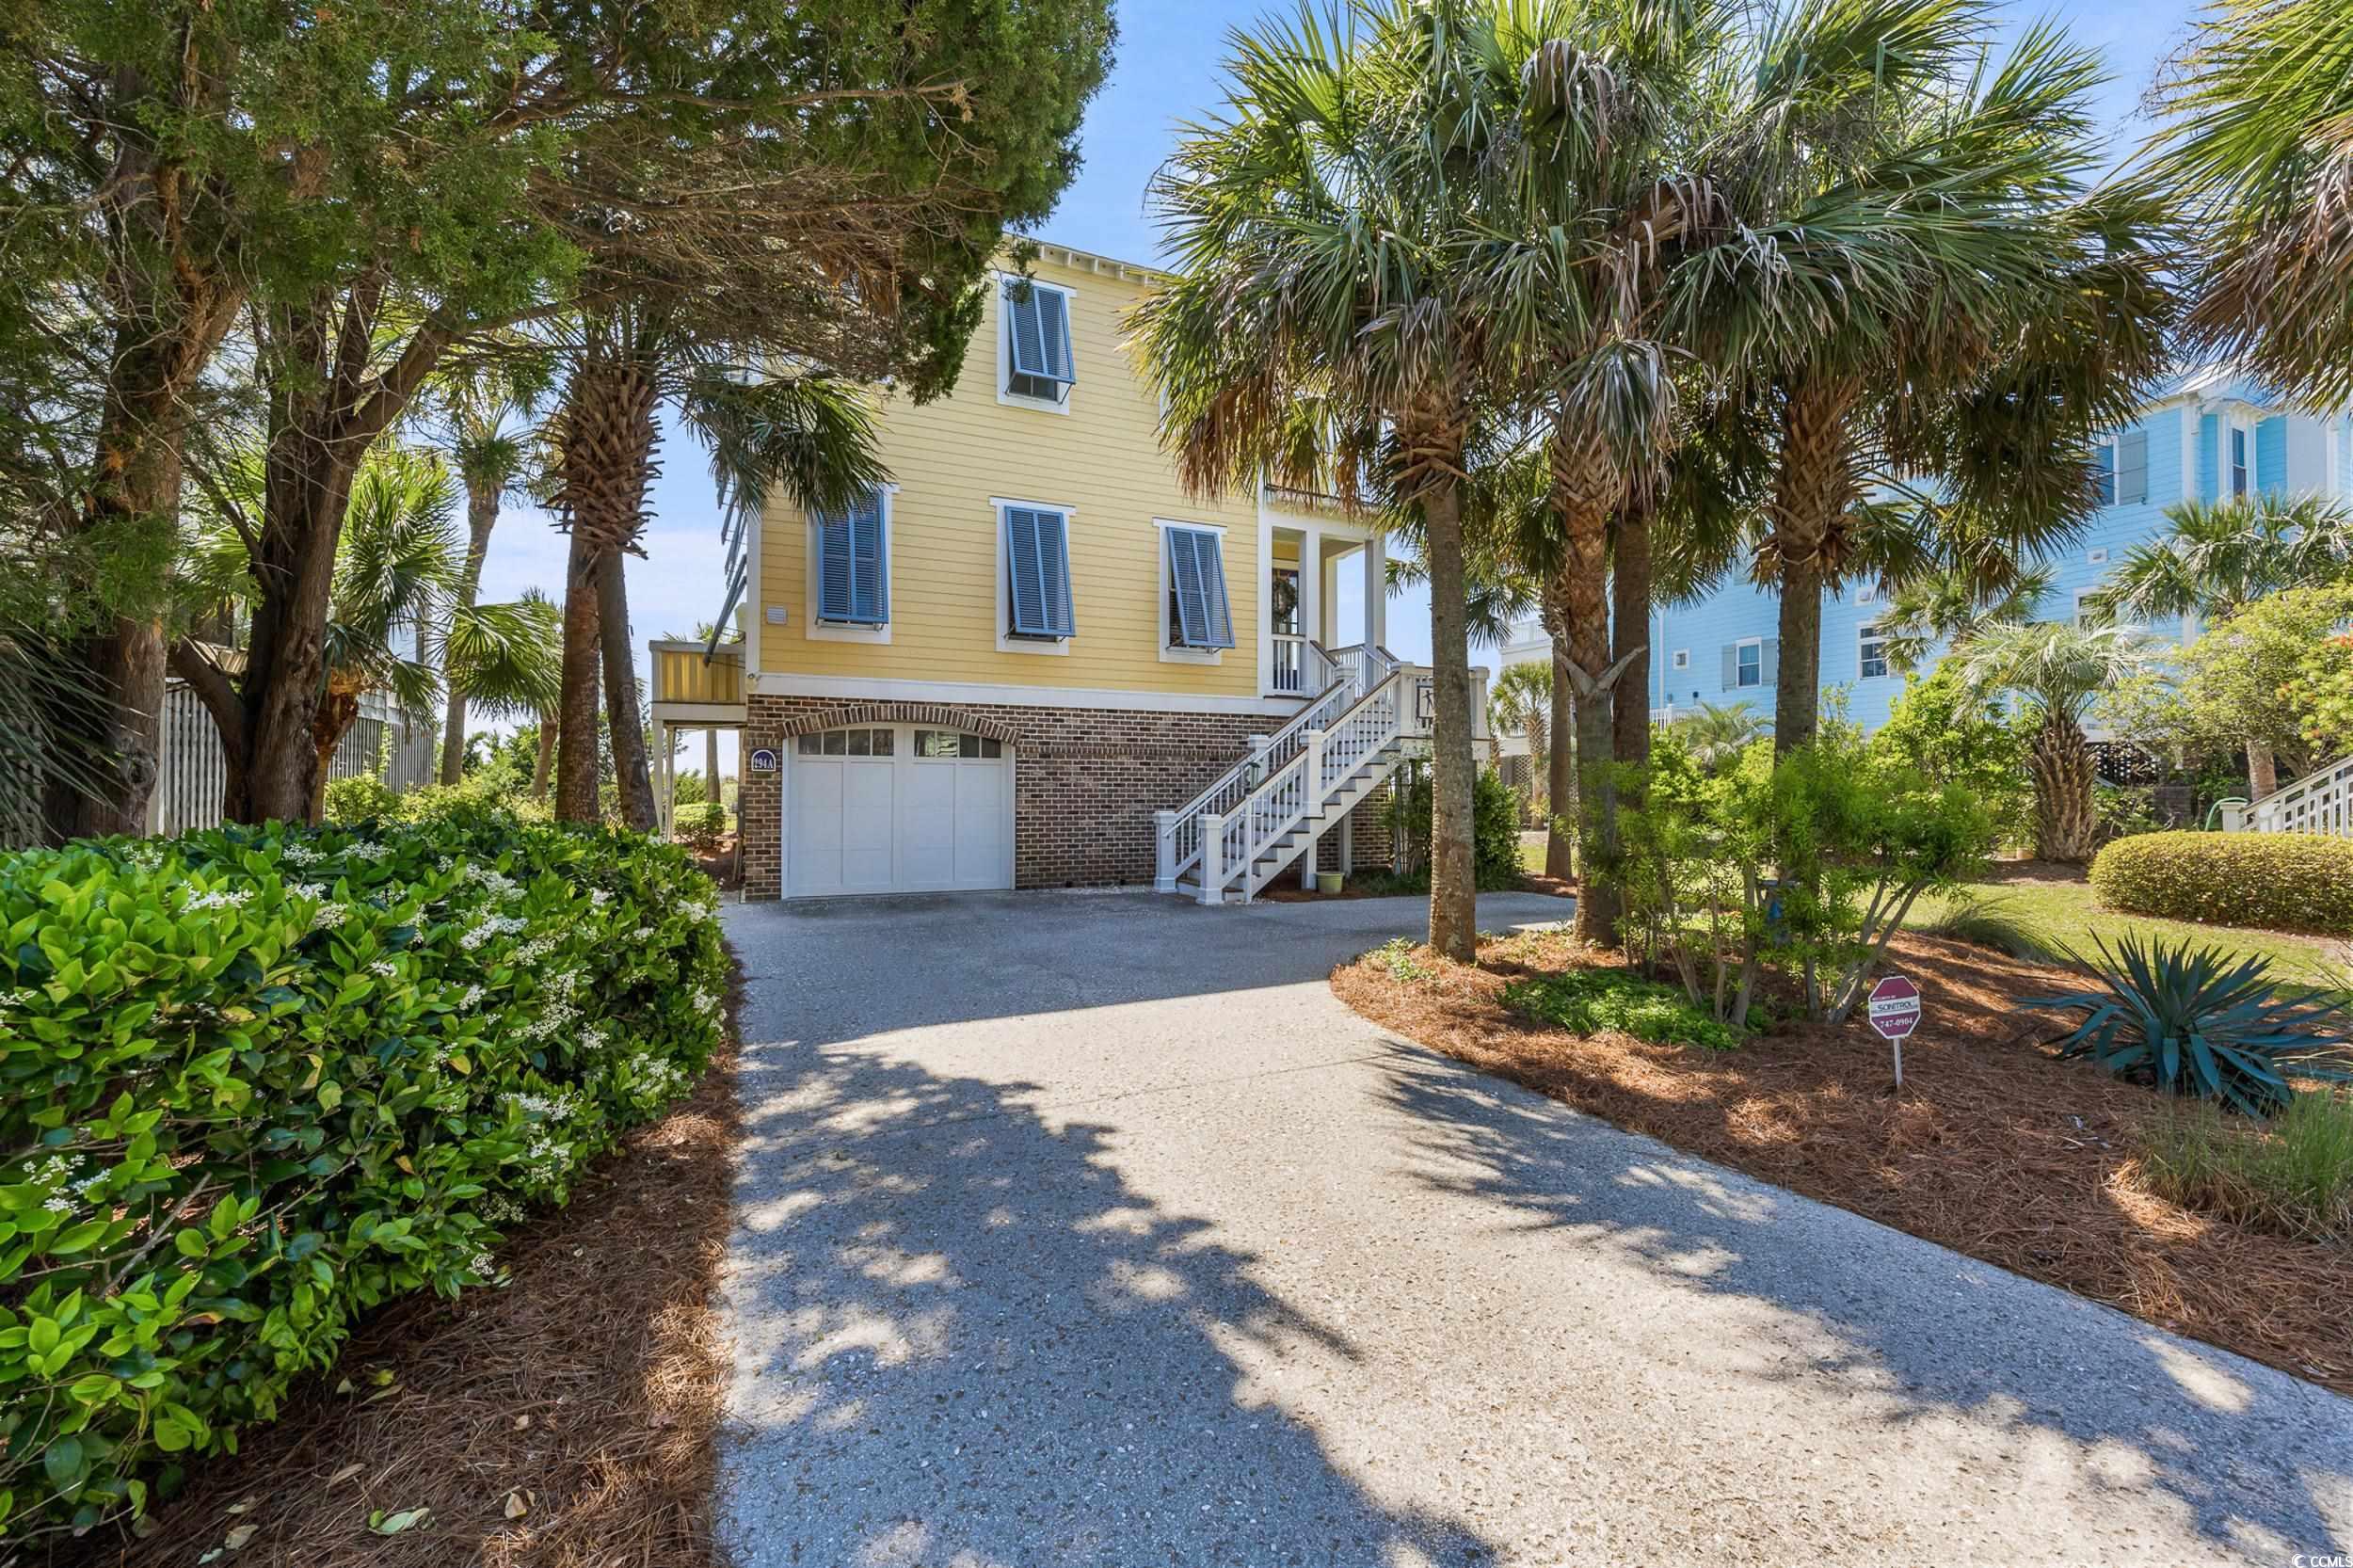 welcome to historical pawleys island! offering panoramic views of the atlantic ocean. this is your opportunity to make lasting memories.  the home is complete with 5 bedroom and 5 en-suite baths plus a 1/2 bath! open floorplan with coastal colors. one bedroom is currently used as an office. the kitchen boasts a wolf 6 burner gas range with two ovens and a grill, farmhouse sink, asko dishwasher, kitchen aid stainless refrigerator, bead board cabinets, natural stone counters and a charming pantry!  recent upgrades include refinished pine floors, new elevator mechanics and first floor sun shades.  the elevator services all floors for easy access. this well constructed home features anderson windows and sliding glass doors, superior crown molding, stacked marble surrounds each gas fireplace, tile in all wet areas, aluminum storm shutters, whole house dehumidifier as well as an attic dehumidifier, automatic closet lighting. the oceanfront main suite features a gas fireplace, sun filter shades and a sumptuous bath complete with rainfall glass shower.  take the spiral stairs to the crows nest to enjoy amazing sunsets.